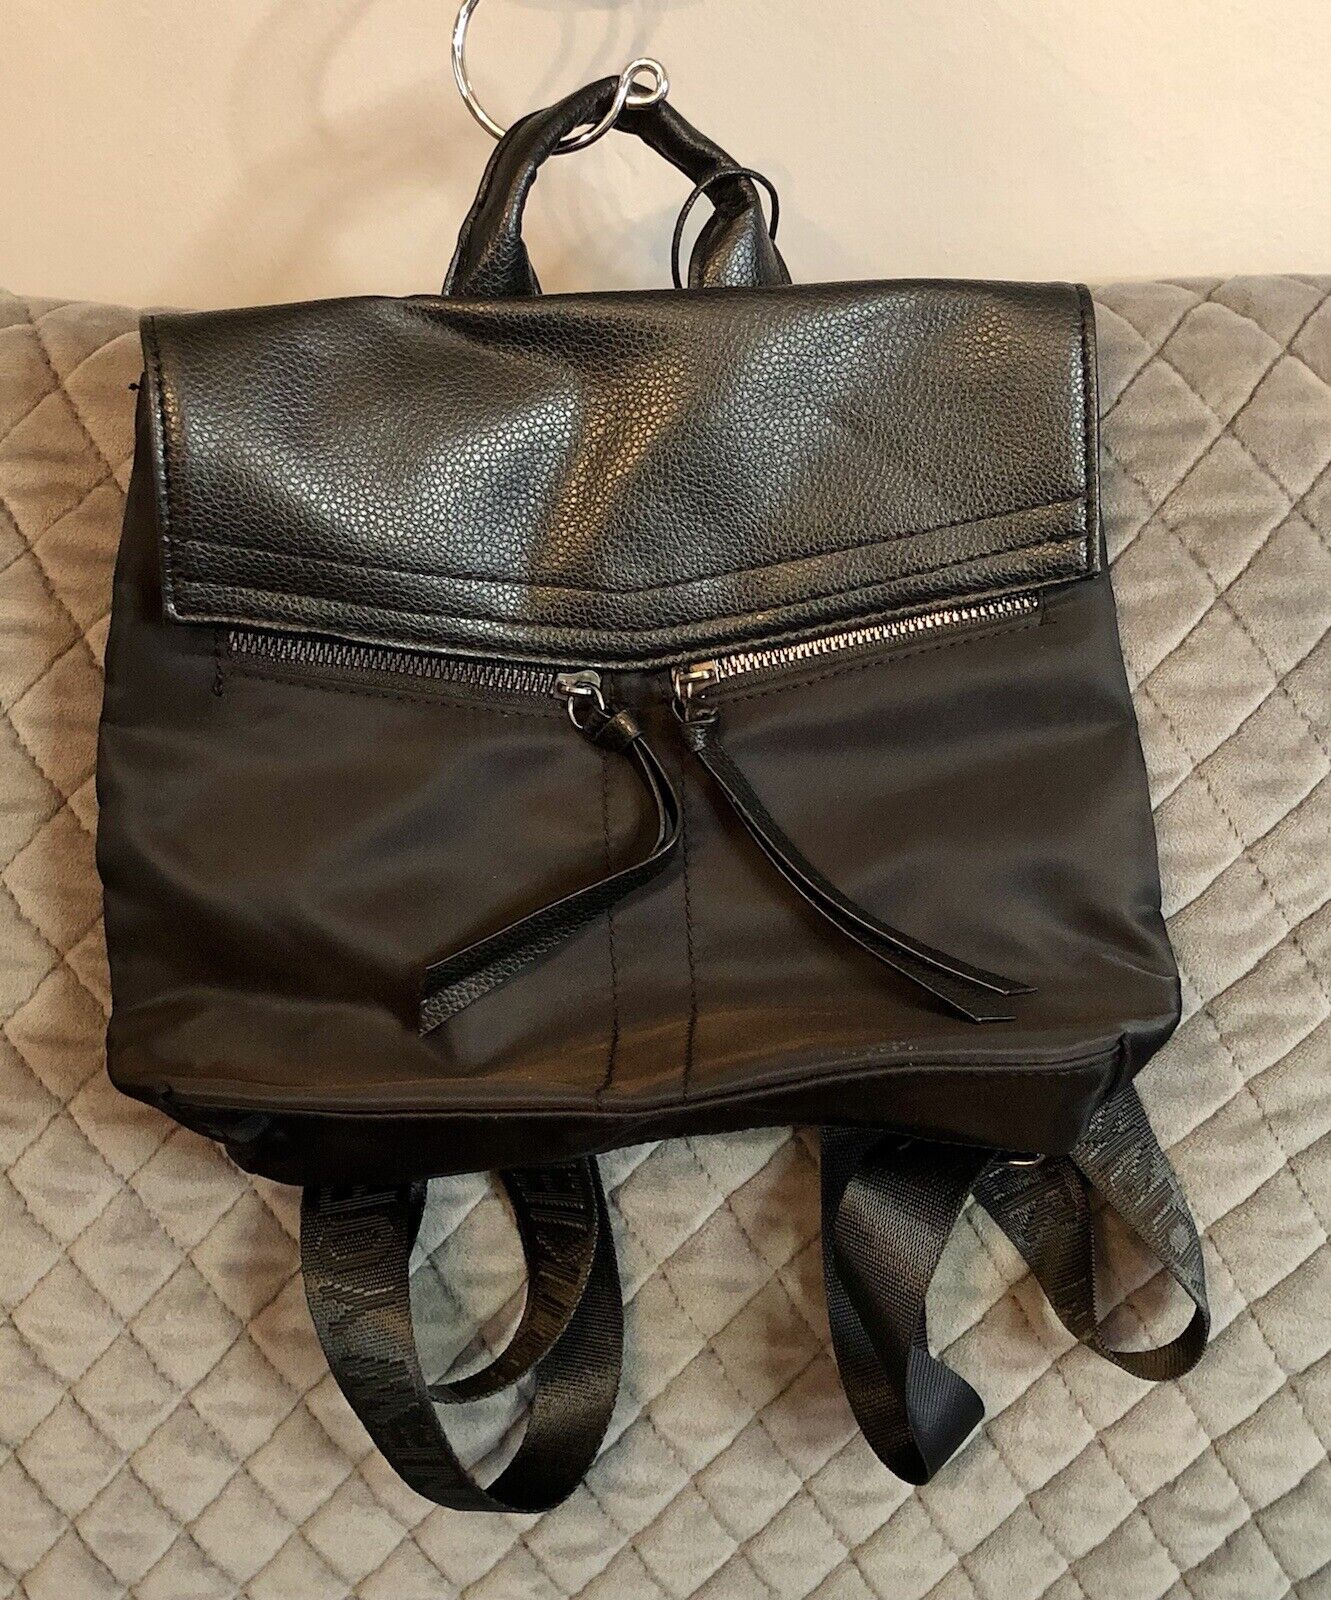 Botkier Black Small Backpack NWT